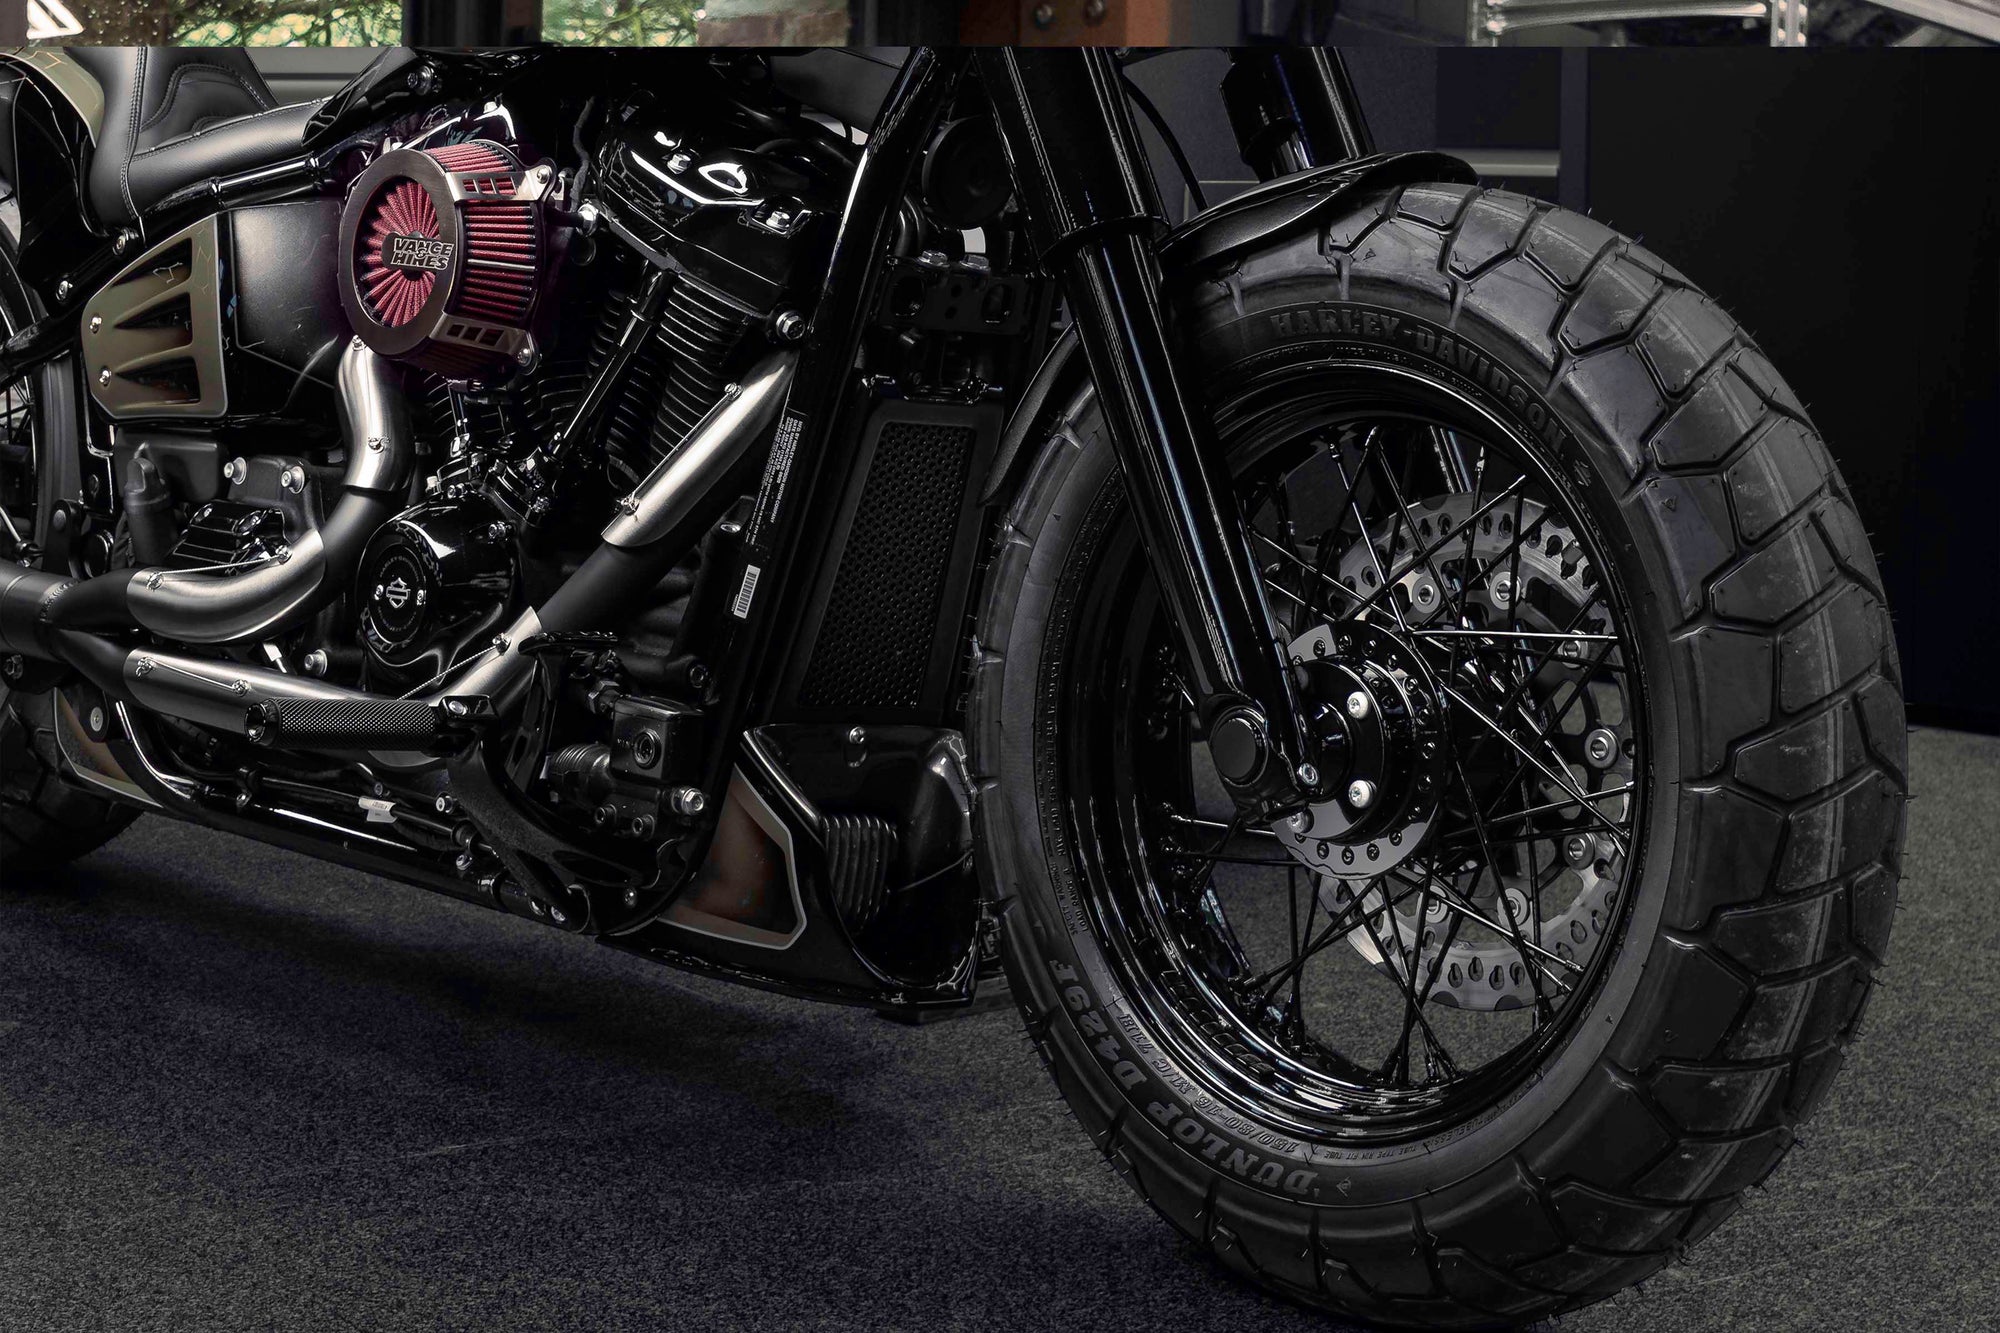 Zoomed Harley Davidson Street Bob motorcycle with Killer Custom parts from the front in a modern bike shop